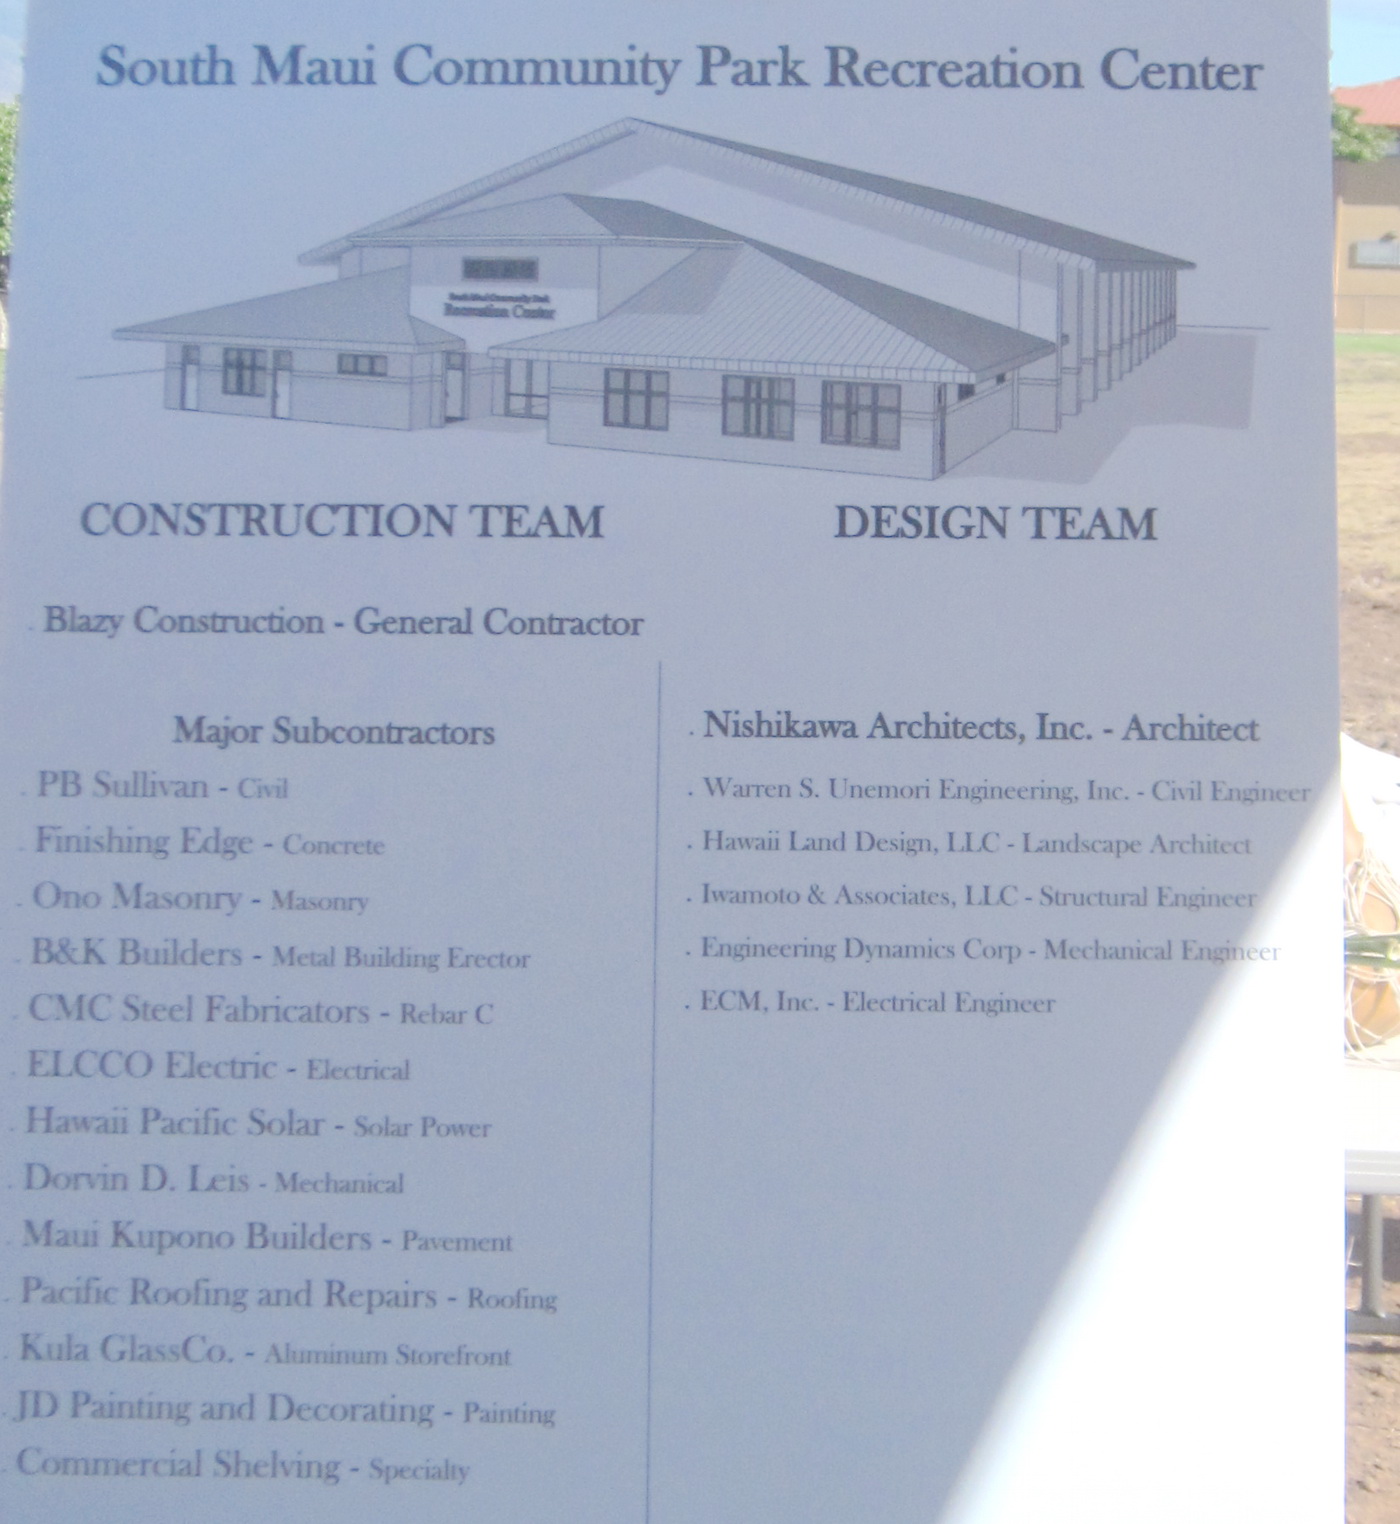 KIHEI GYM FINALLY BREAKS GROUND AT COMMUNITY PARK THIS MORNING